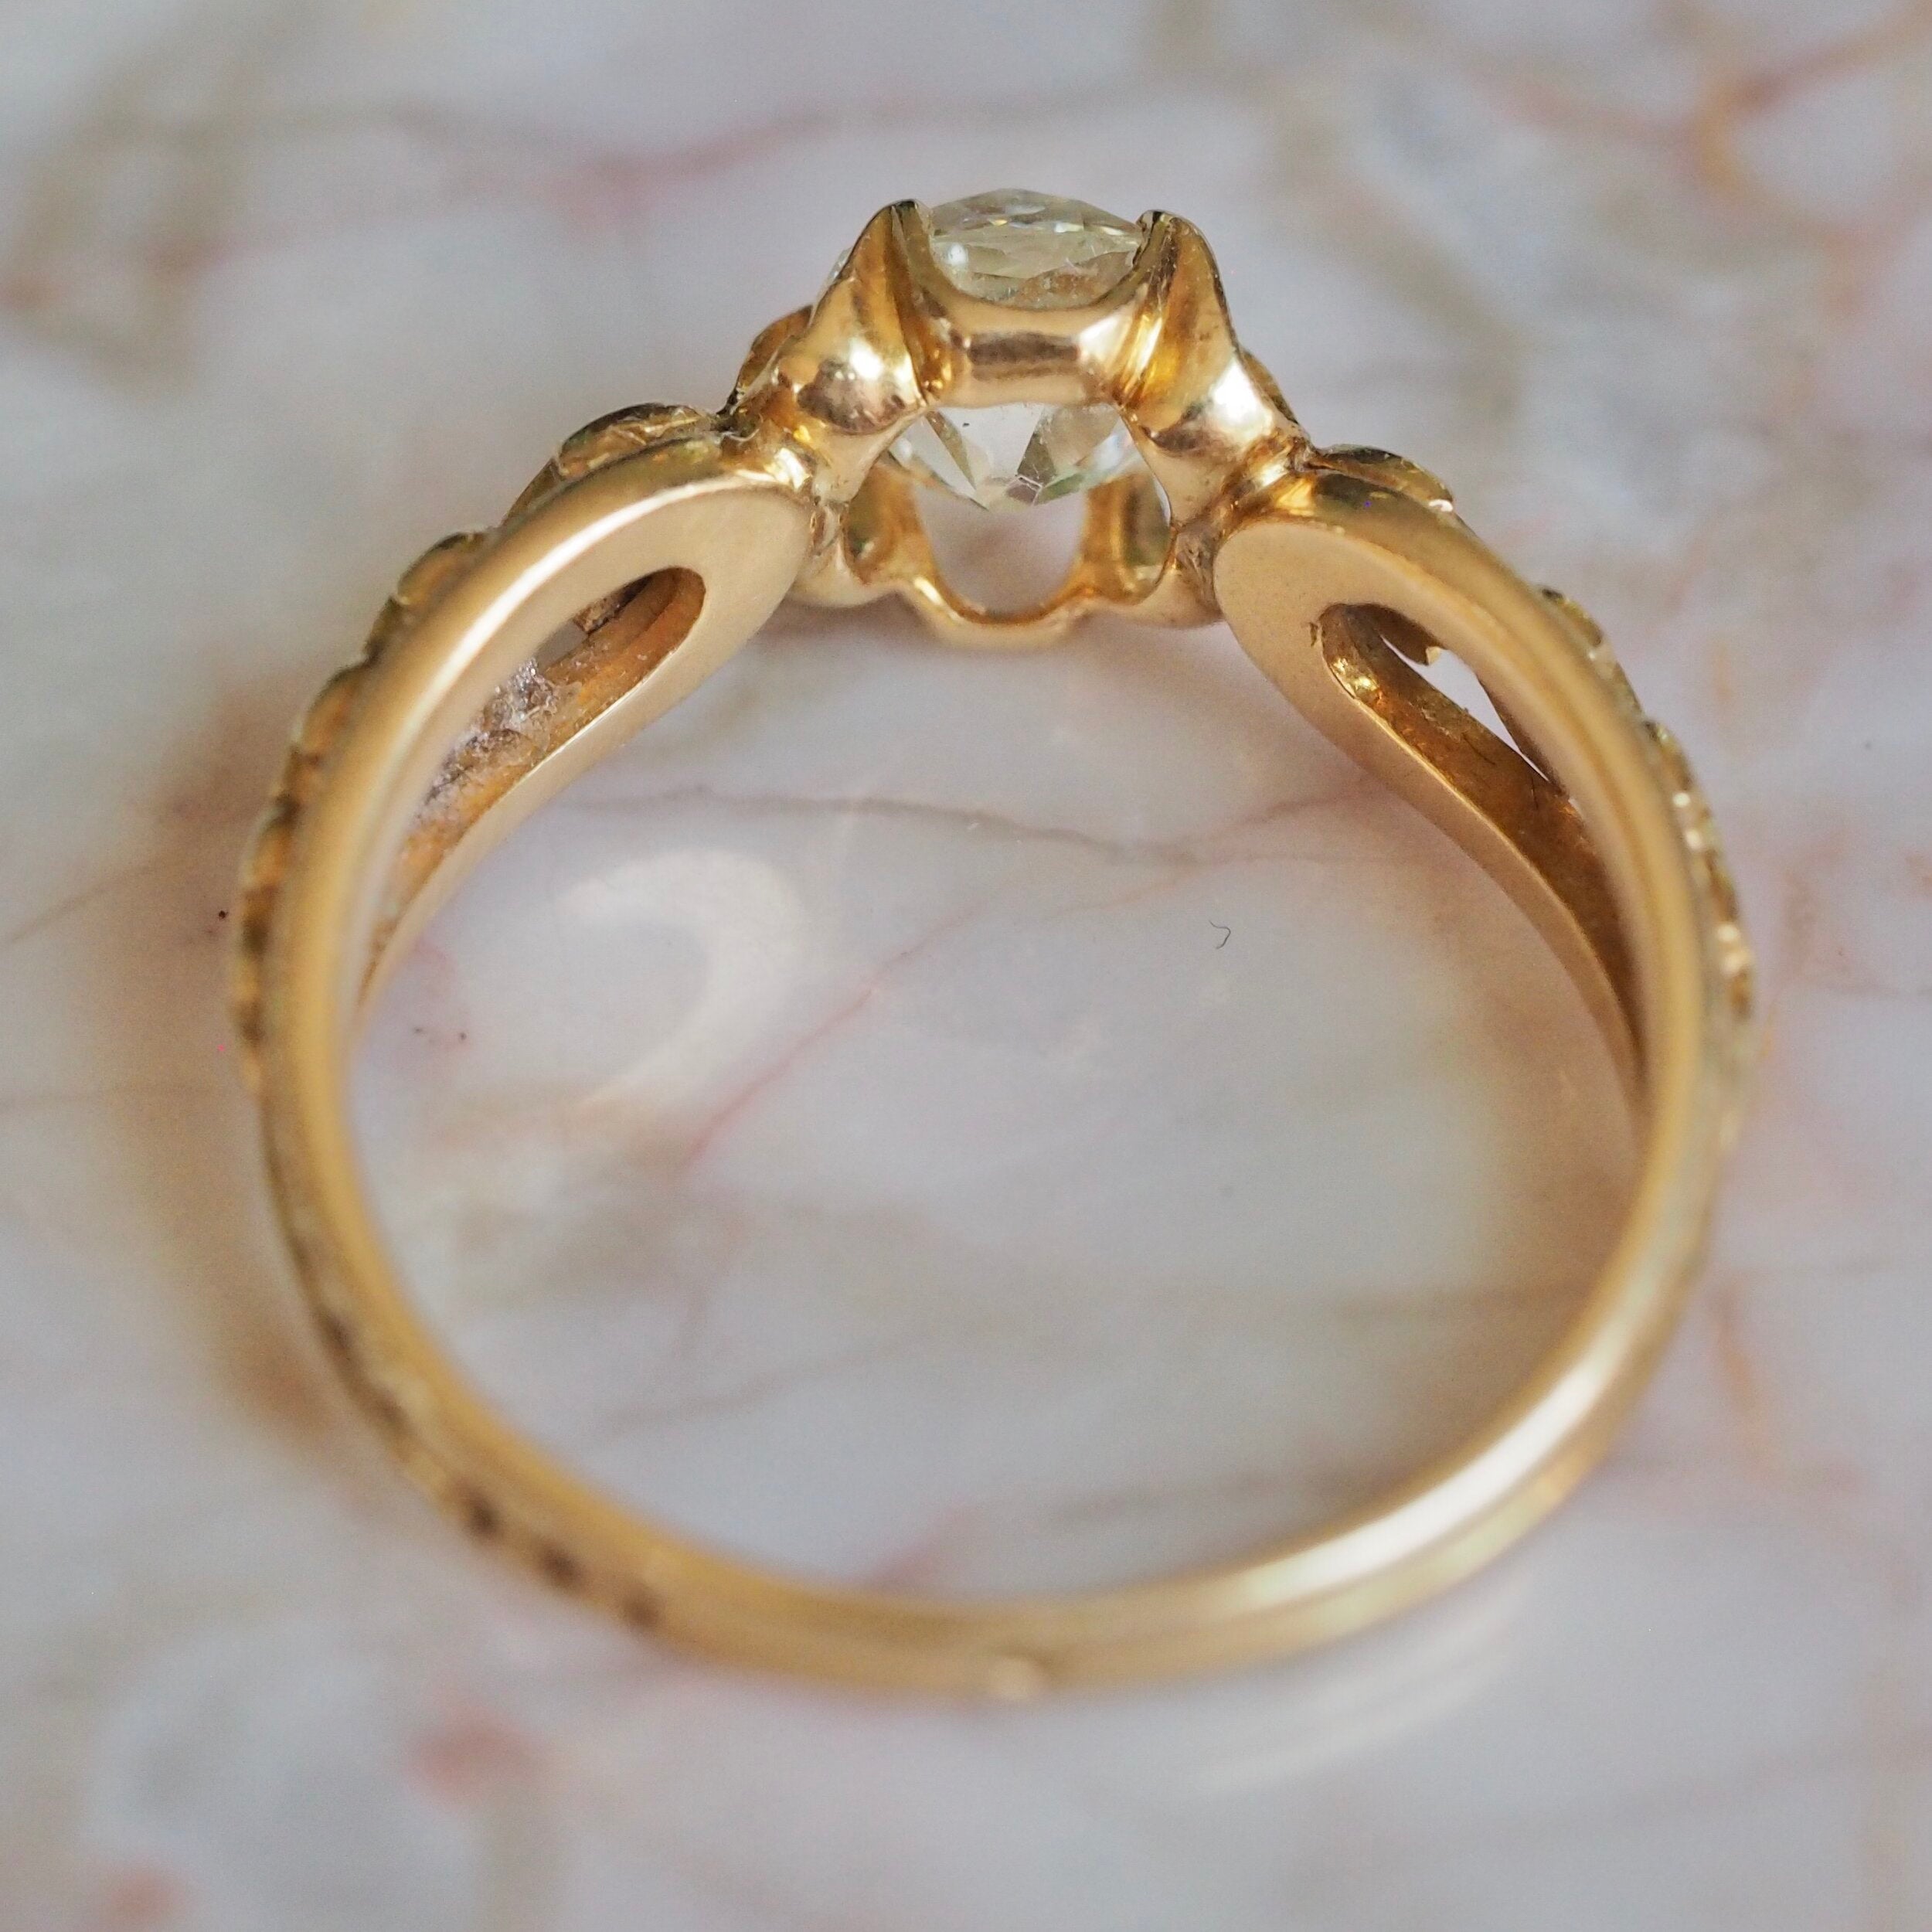 Antique French 18k Gold Old Mine Cut Diamond Engagement Ring